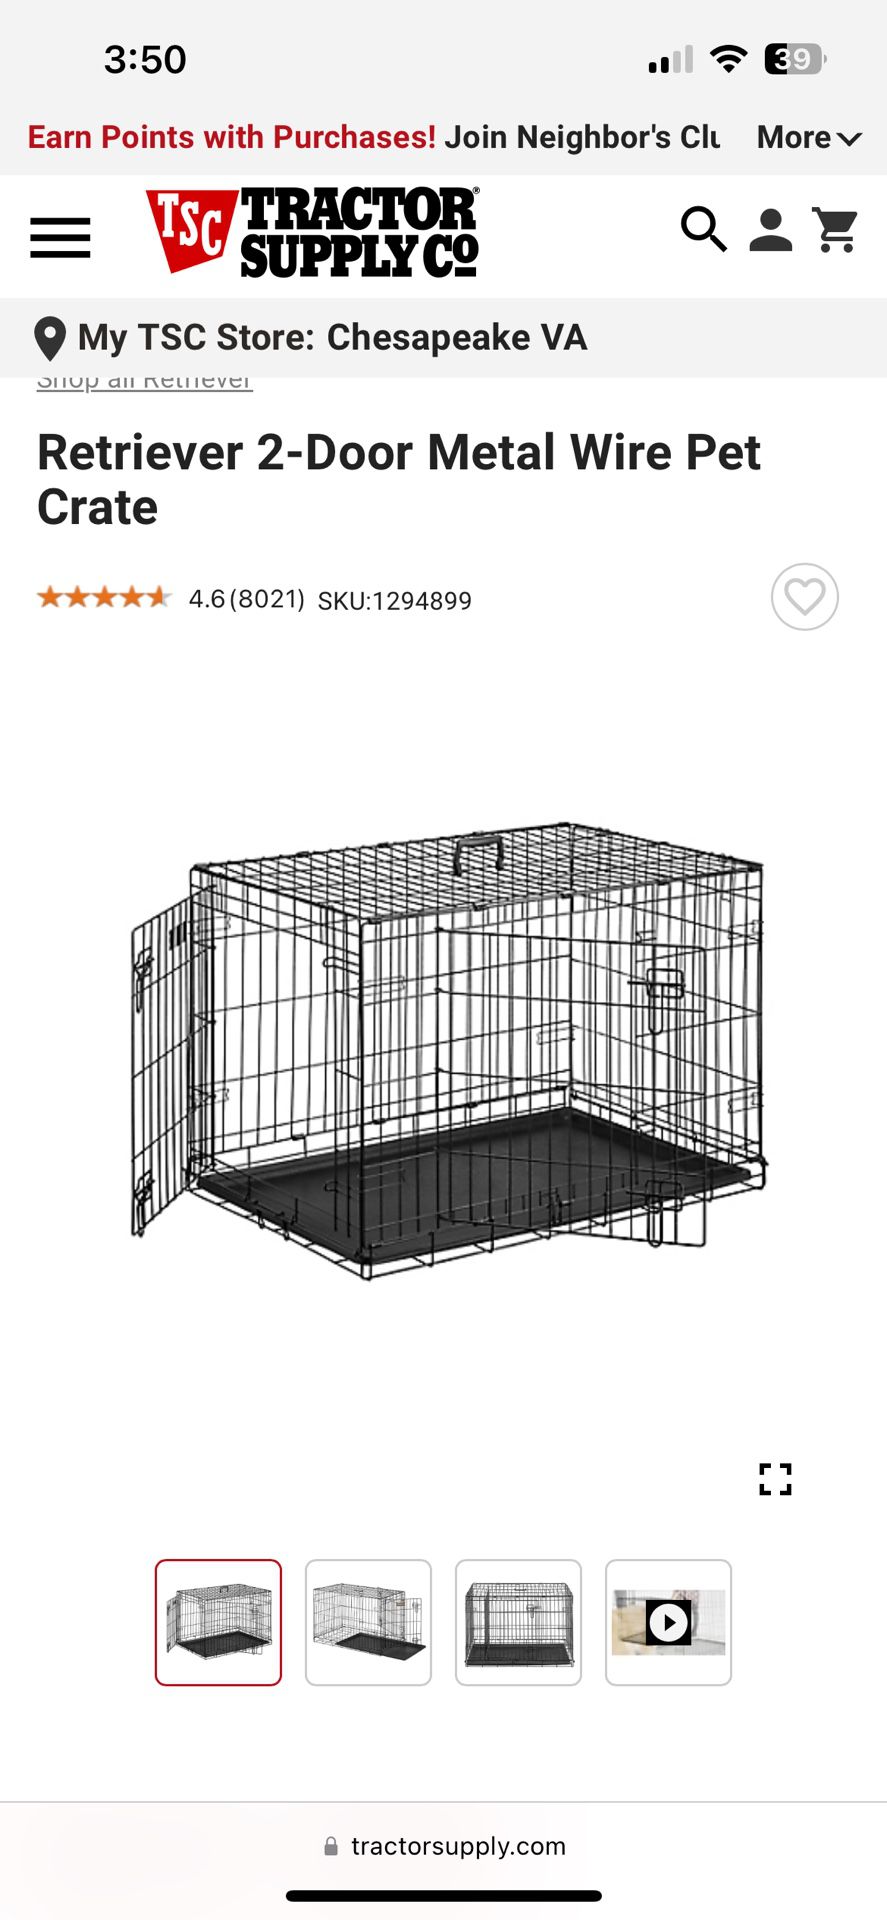 Dog crate For Sale